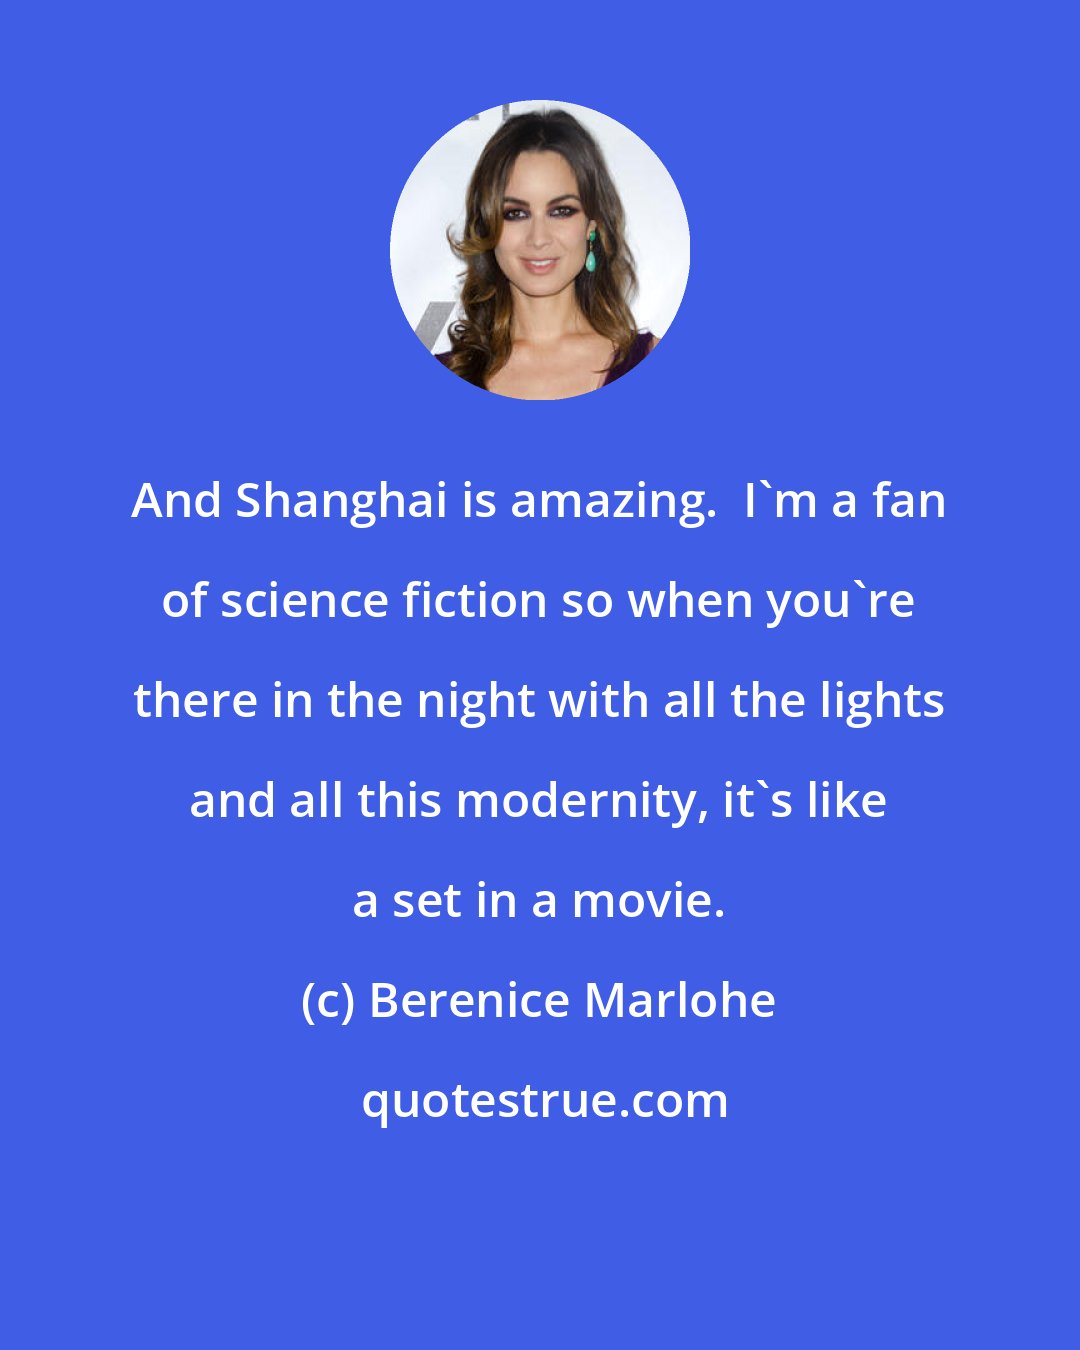 Berenice Marlohe: And Shanghai is amazing.  I'm a fan of science fiction so when you're there in the night with all the lights and all this modernity, it's like a set in a movie.